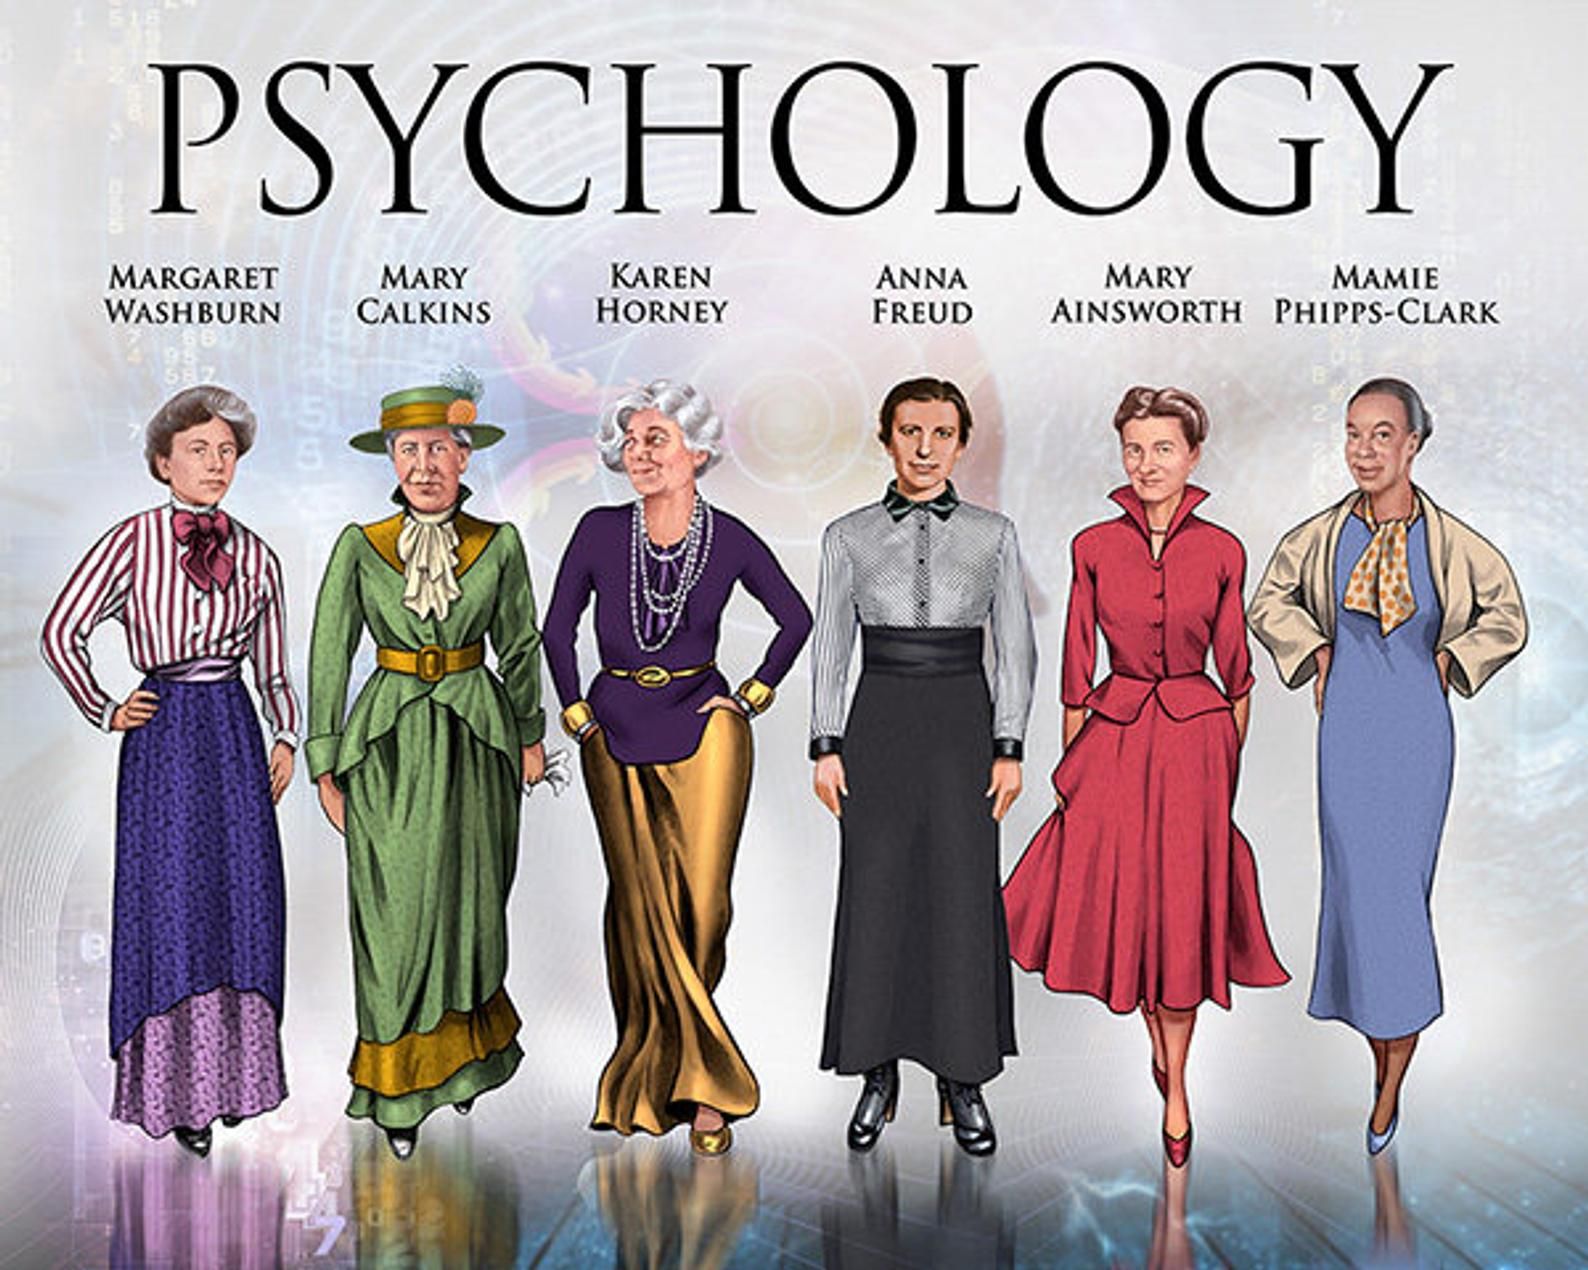 Large Women in Psychology Poster